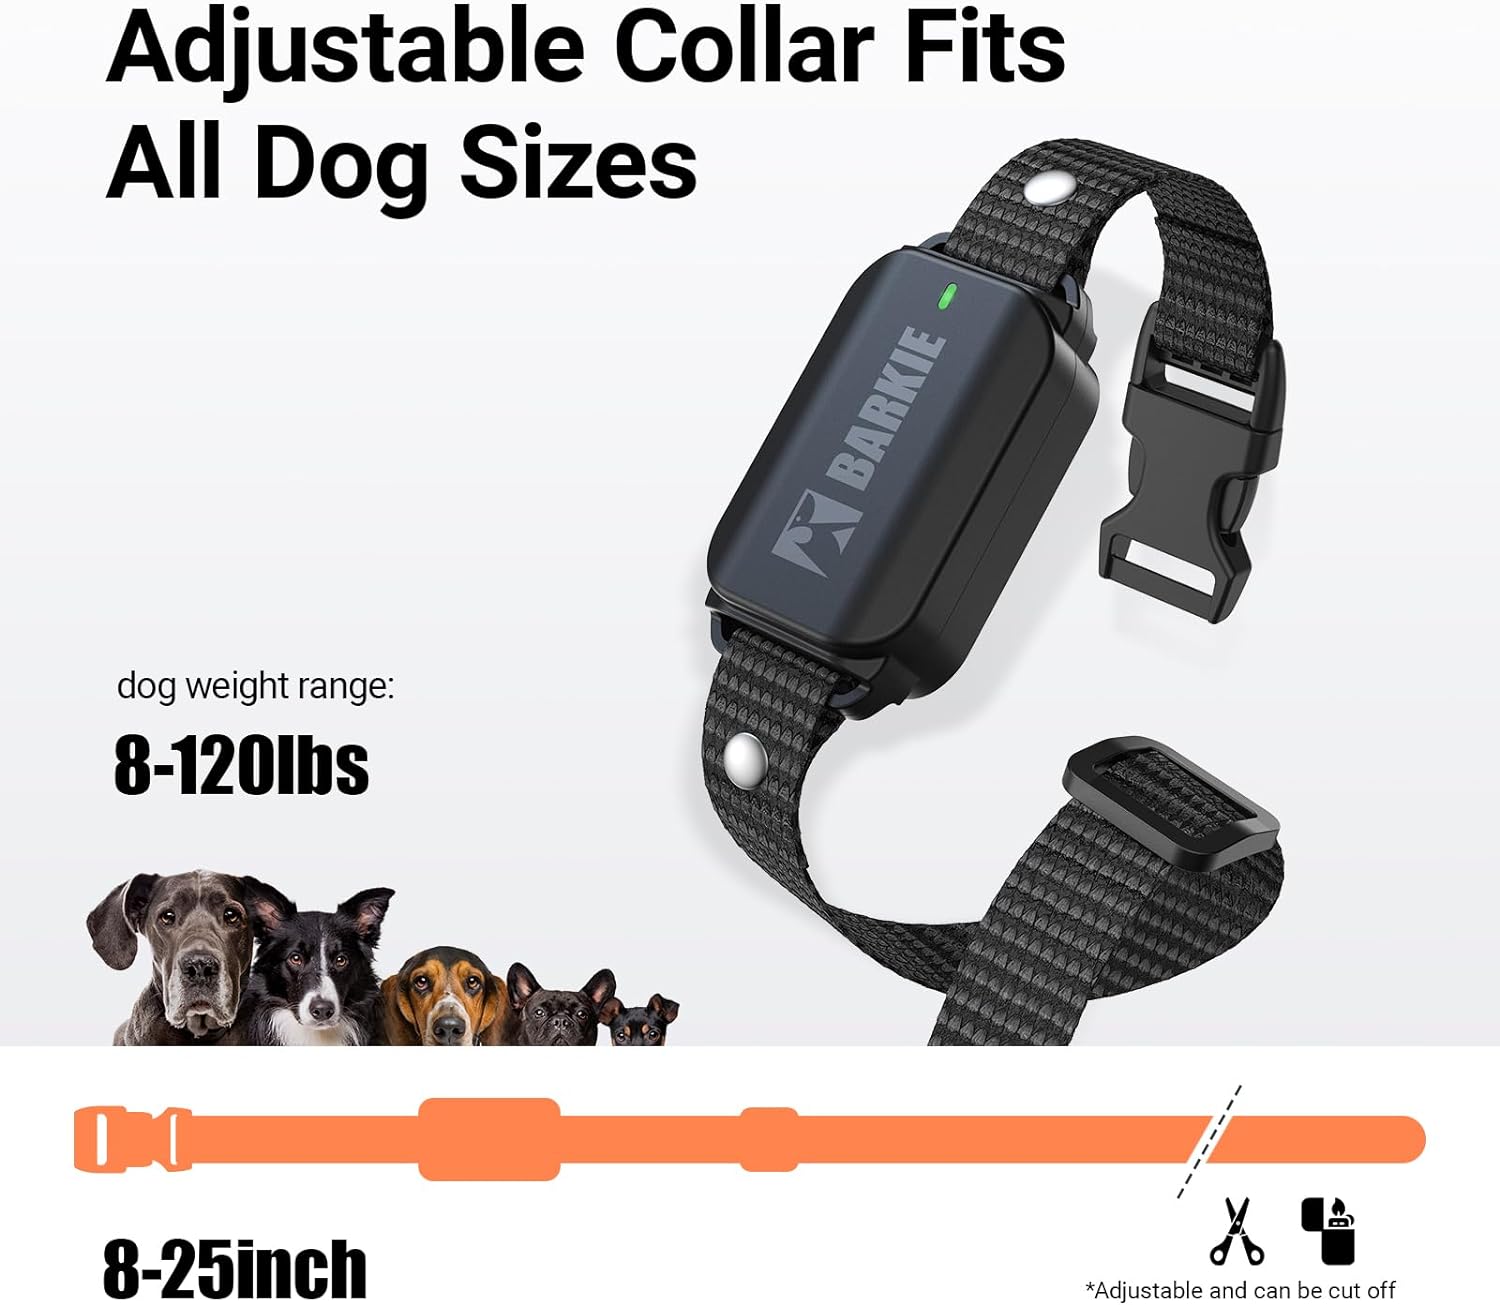 BARKIE Dog Training Collar with Dog Positive Reinforcement Training Booklet Waterproof Shock Collar with Remote for Small Medium Large Dogs (Black)